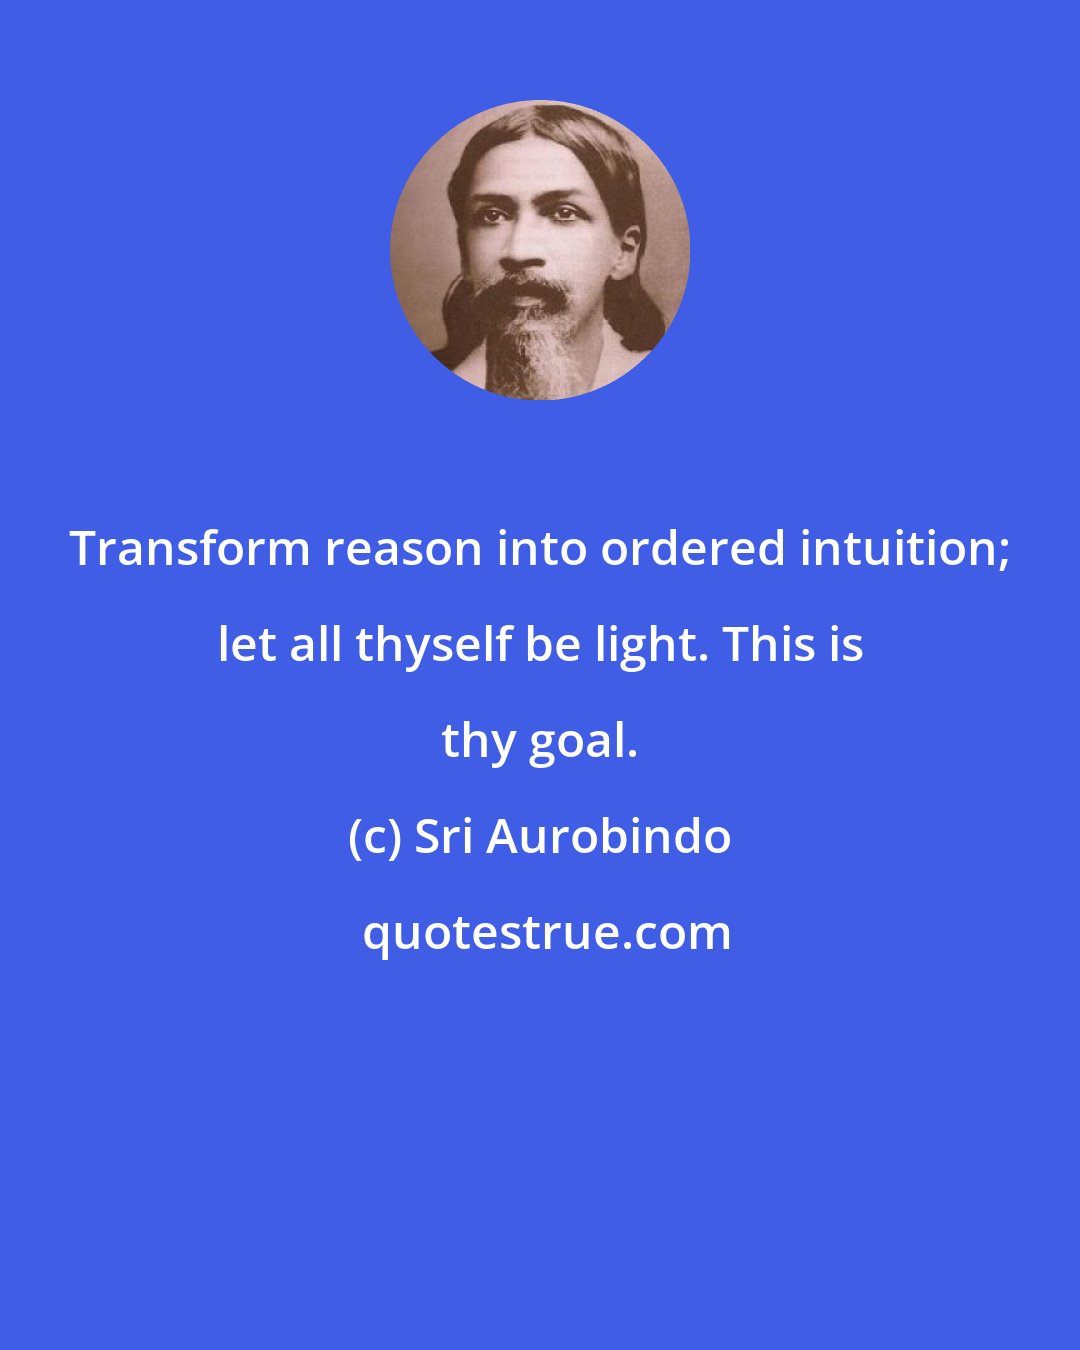 Sri Aurobindo: Transform reason into ordered intuition; let all thyself be light. This is thy goal.